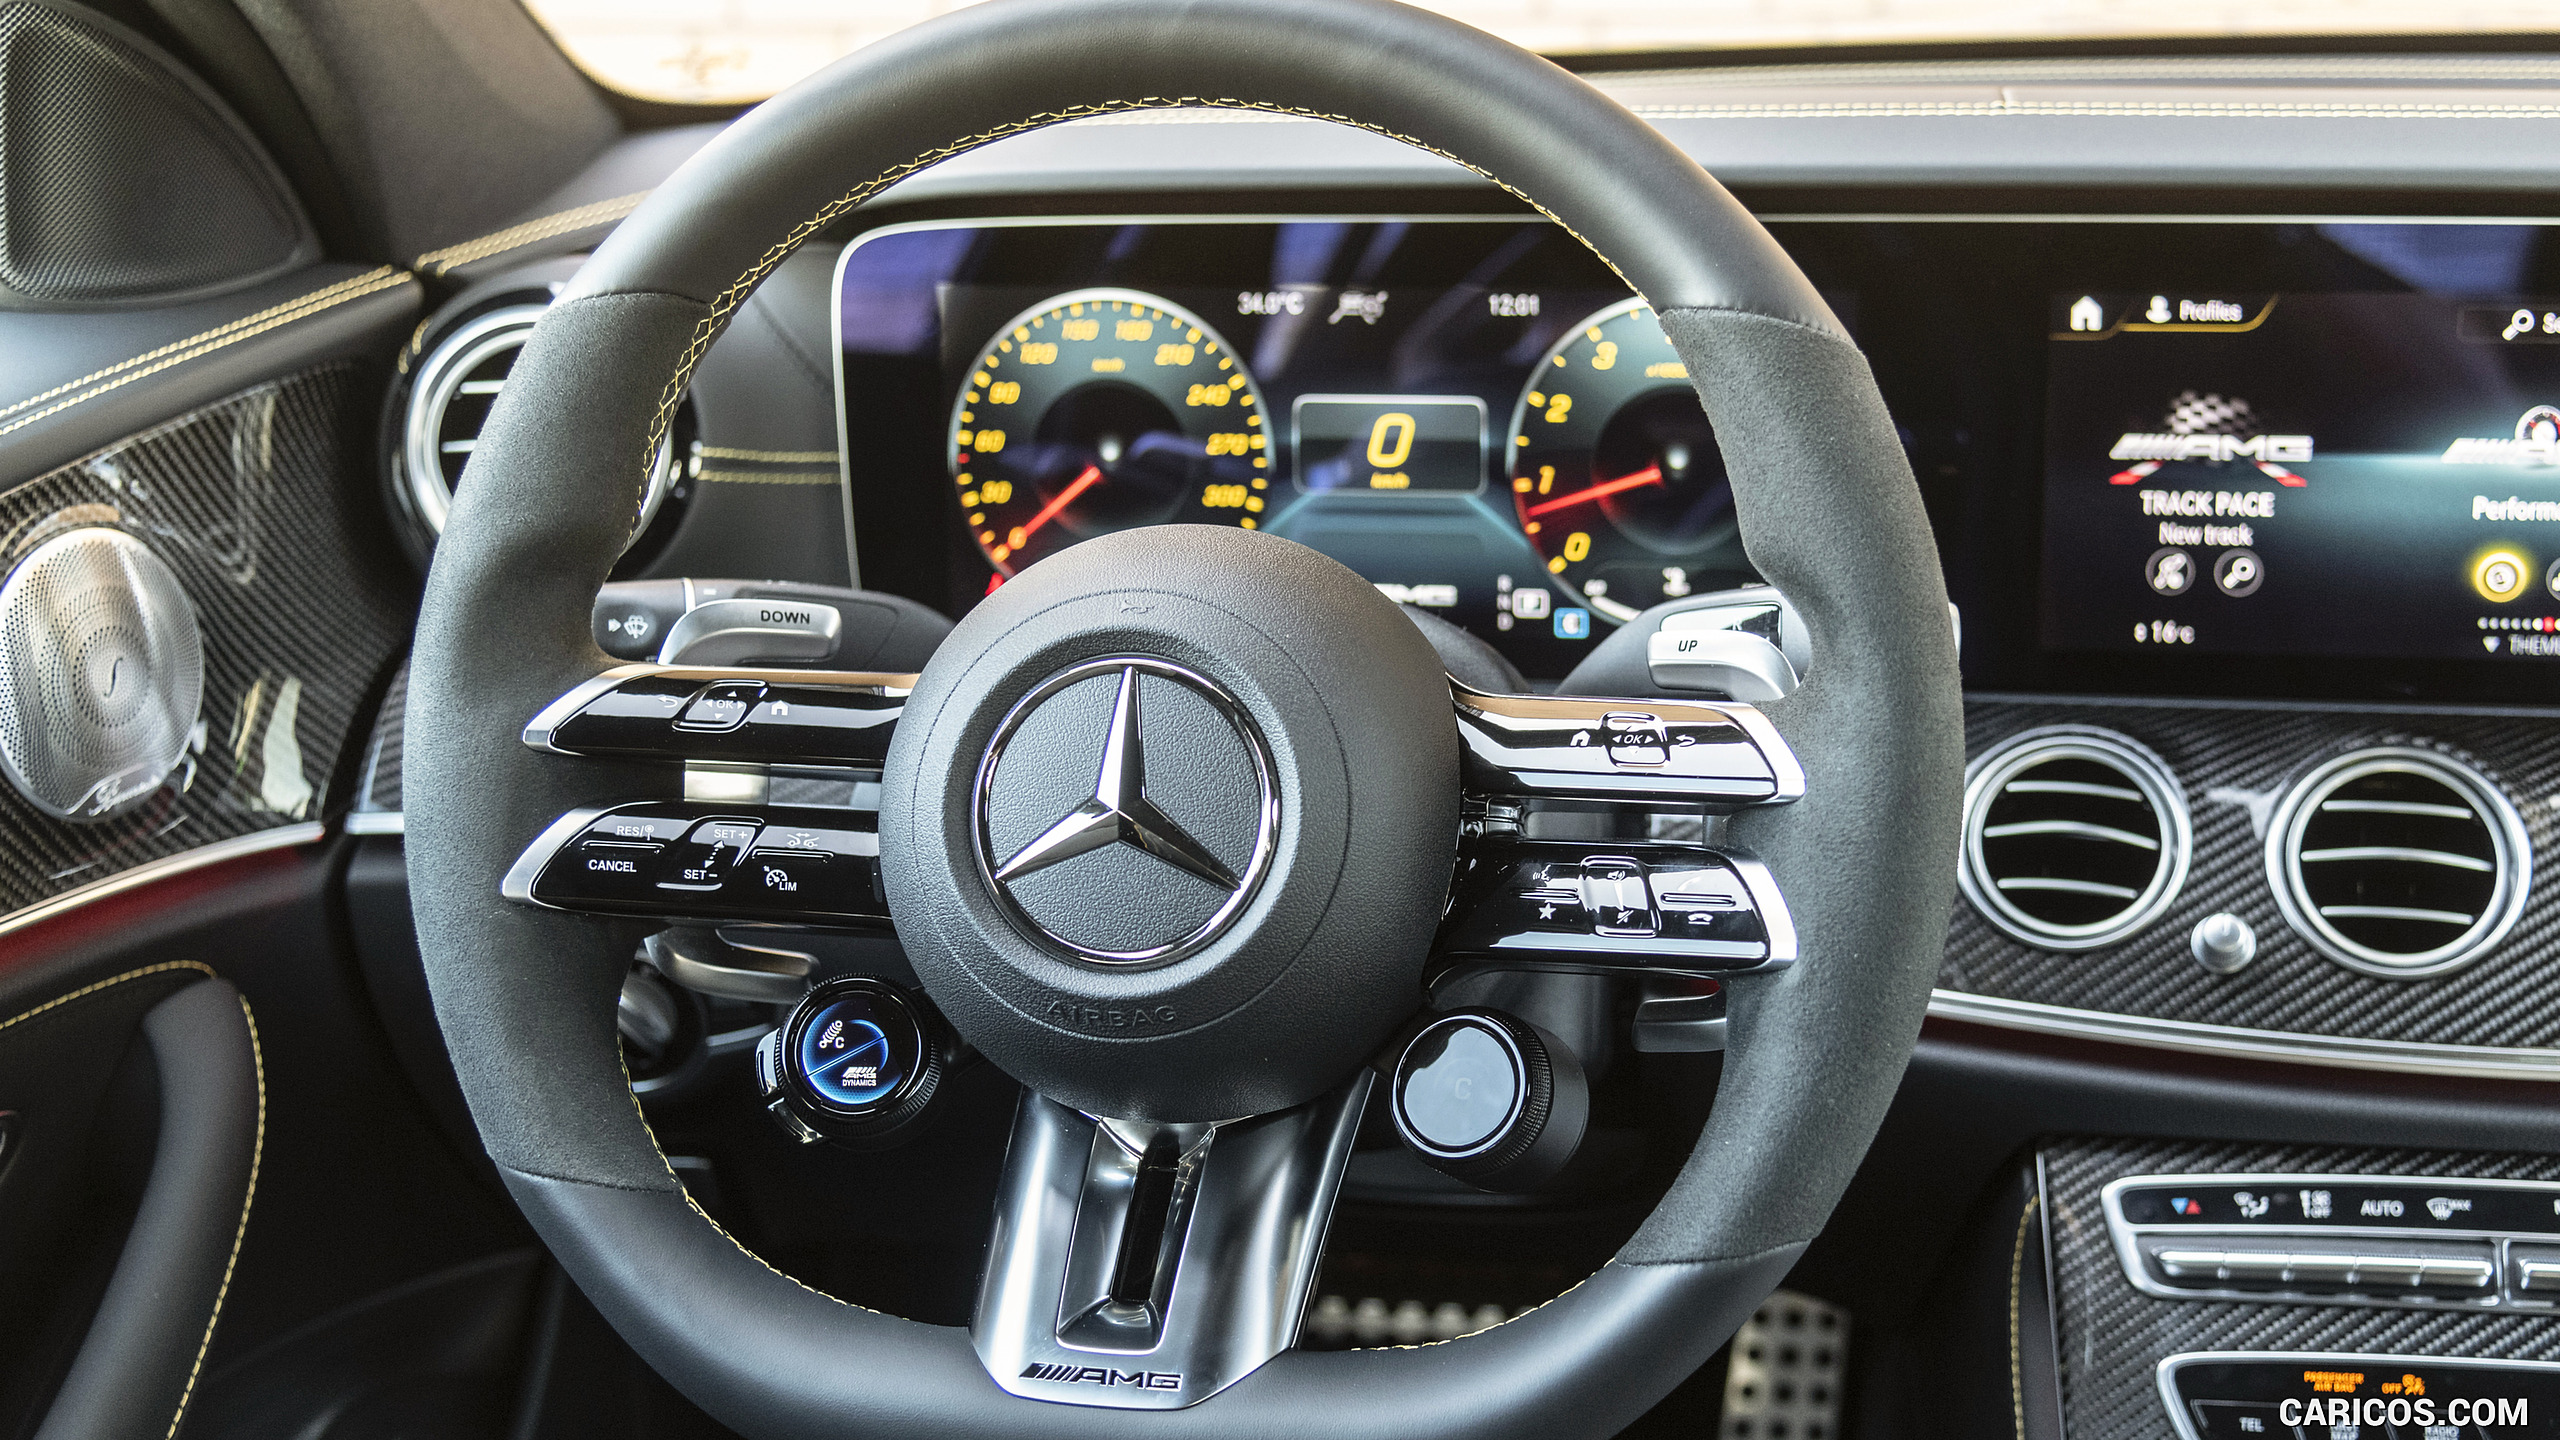 2021 Mercedes-AMG E 63 S 4MATIC+ - Interior, Steering Wheel, #73 of 143